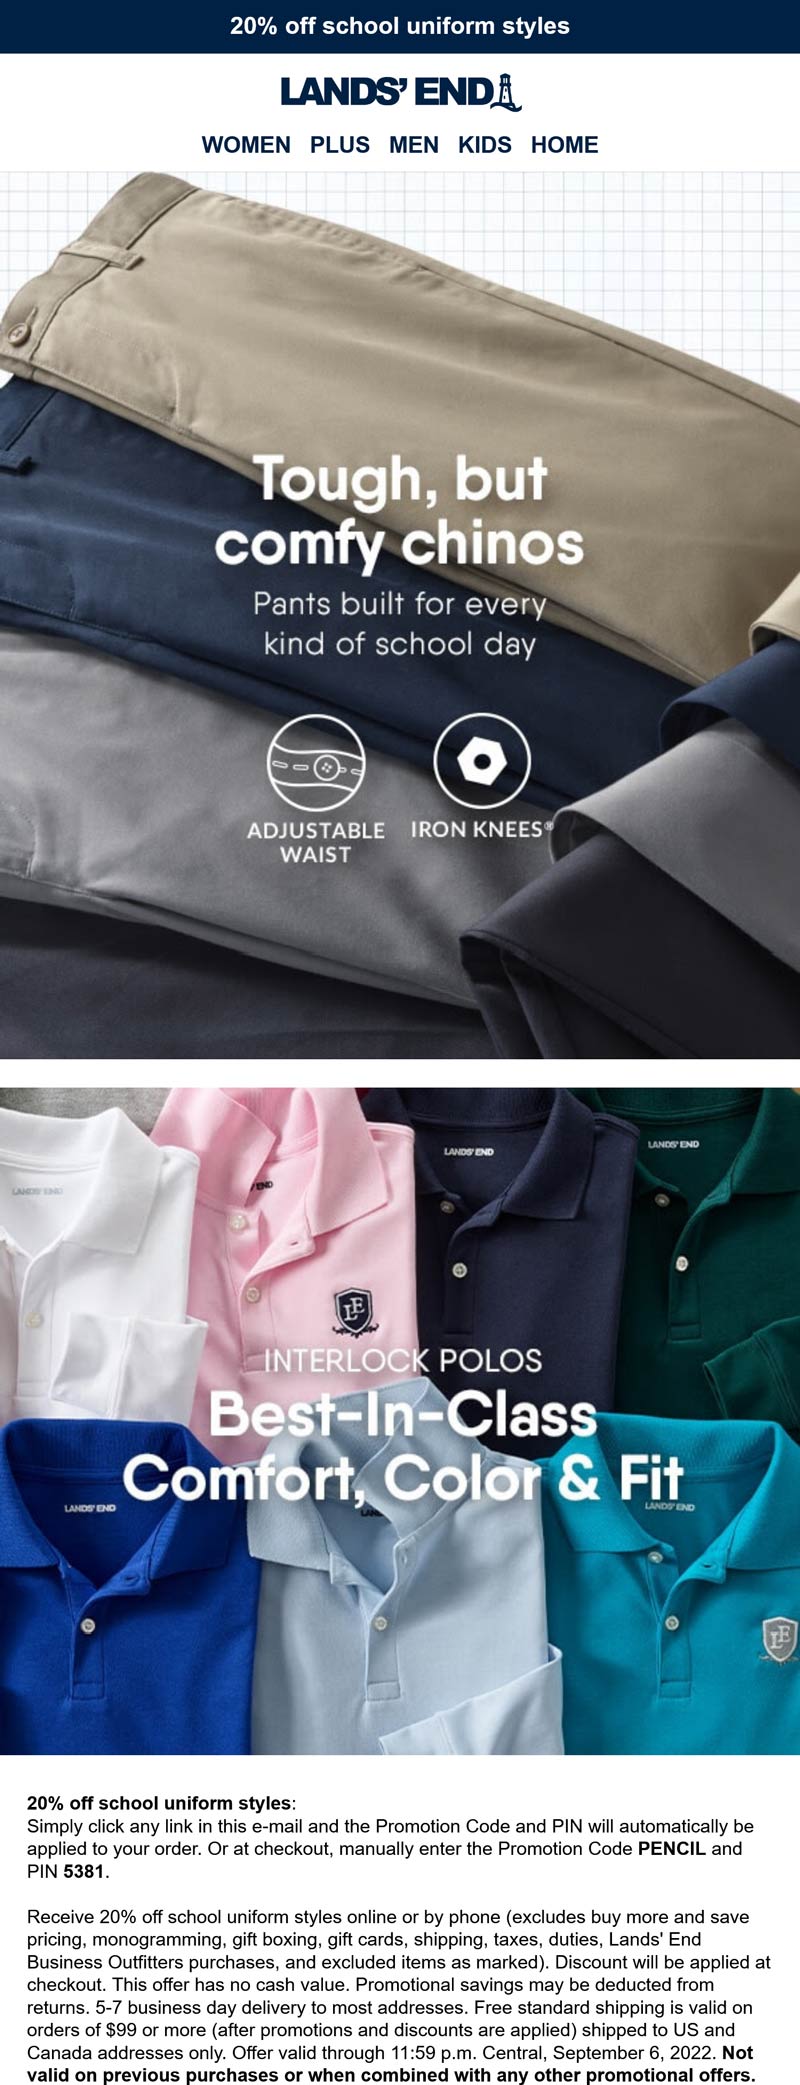 Lands End coupons & promo code for [November 2022]